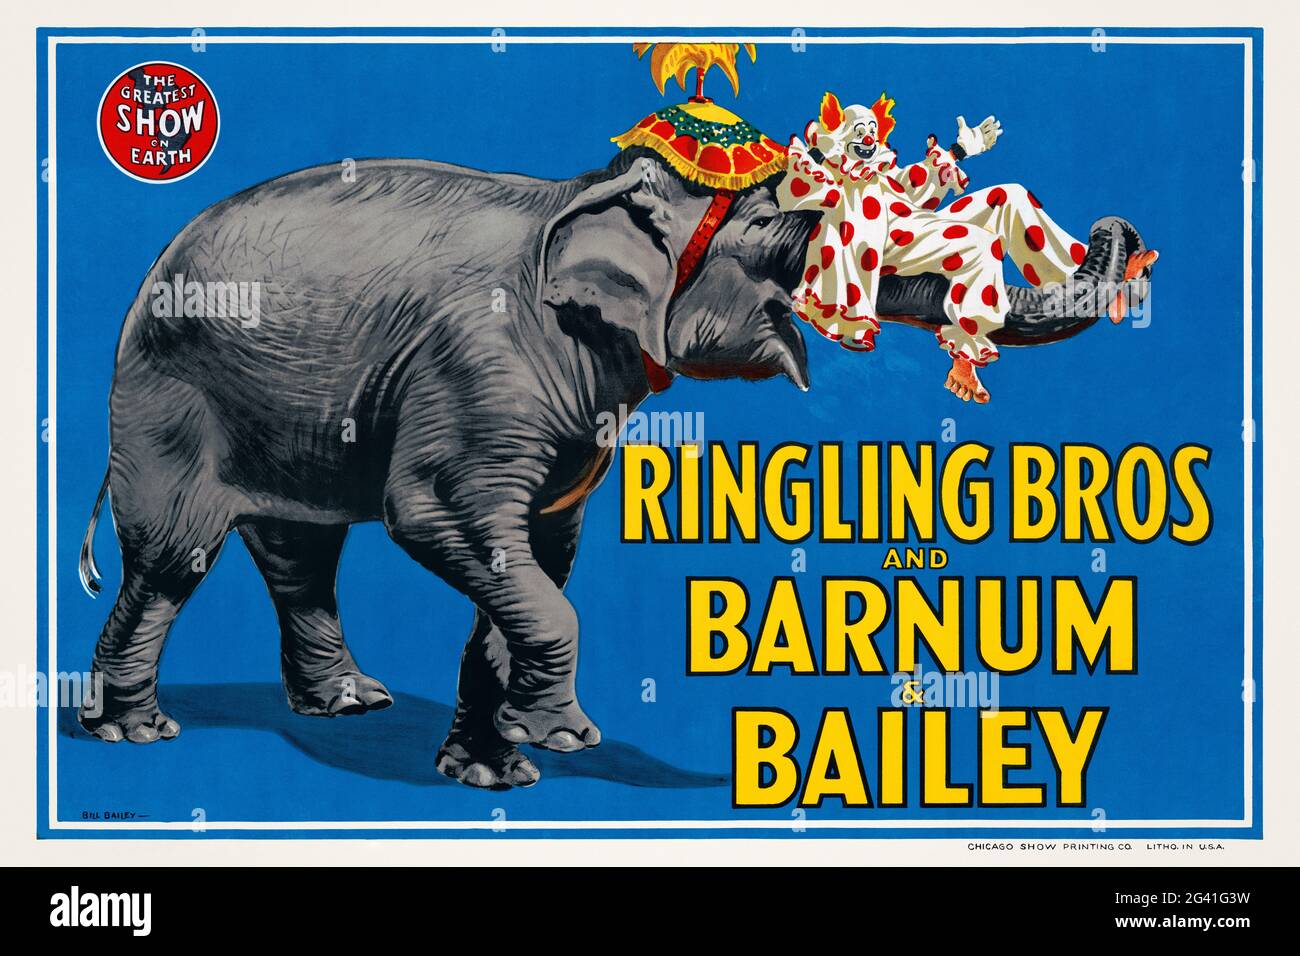 Ringling Bros and Barnum & Bailey. The greatest show on earth by Bill Bailey (1886-1966). Restored vintage poster published in 1945 in the USA. Stock Photo